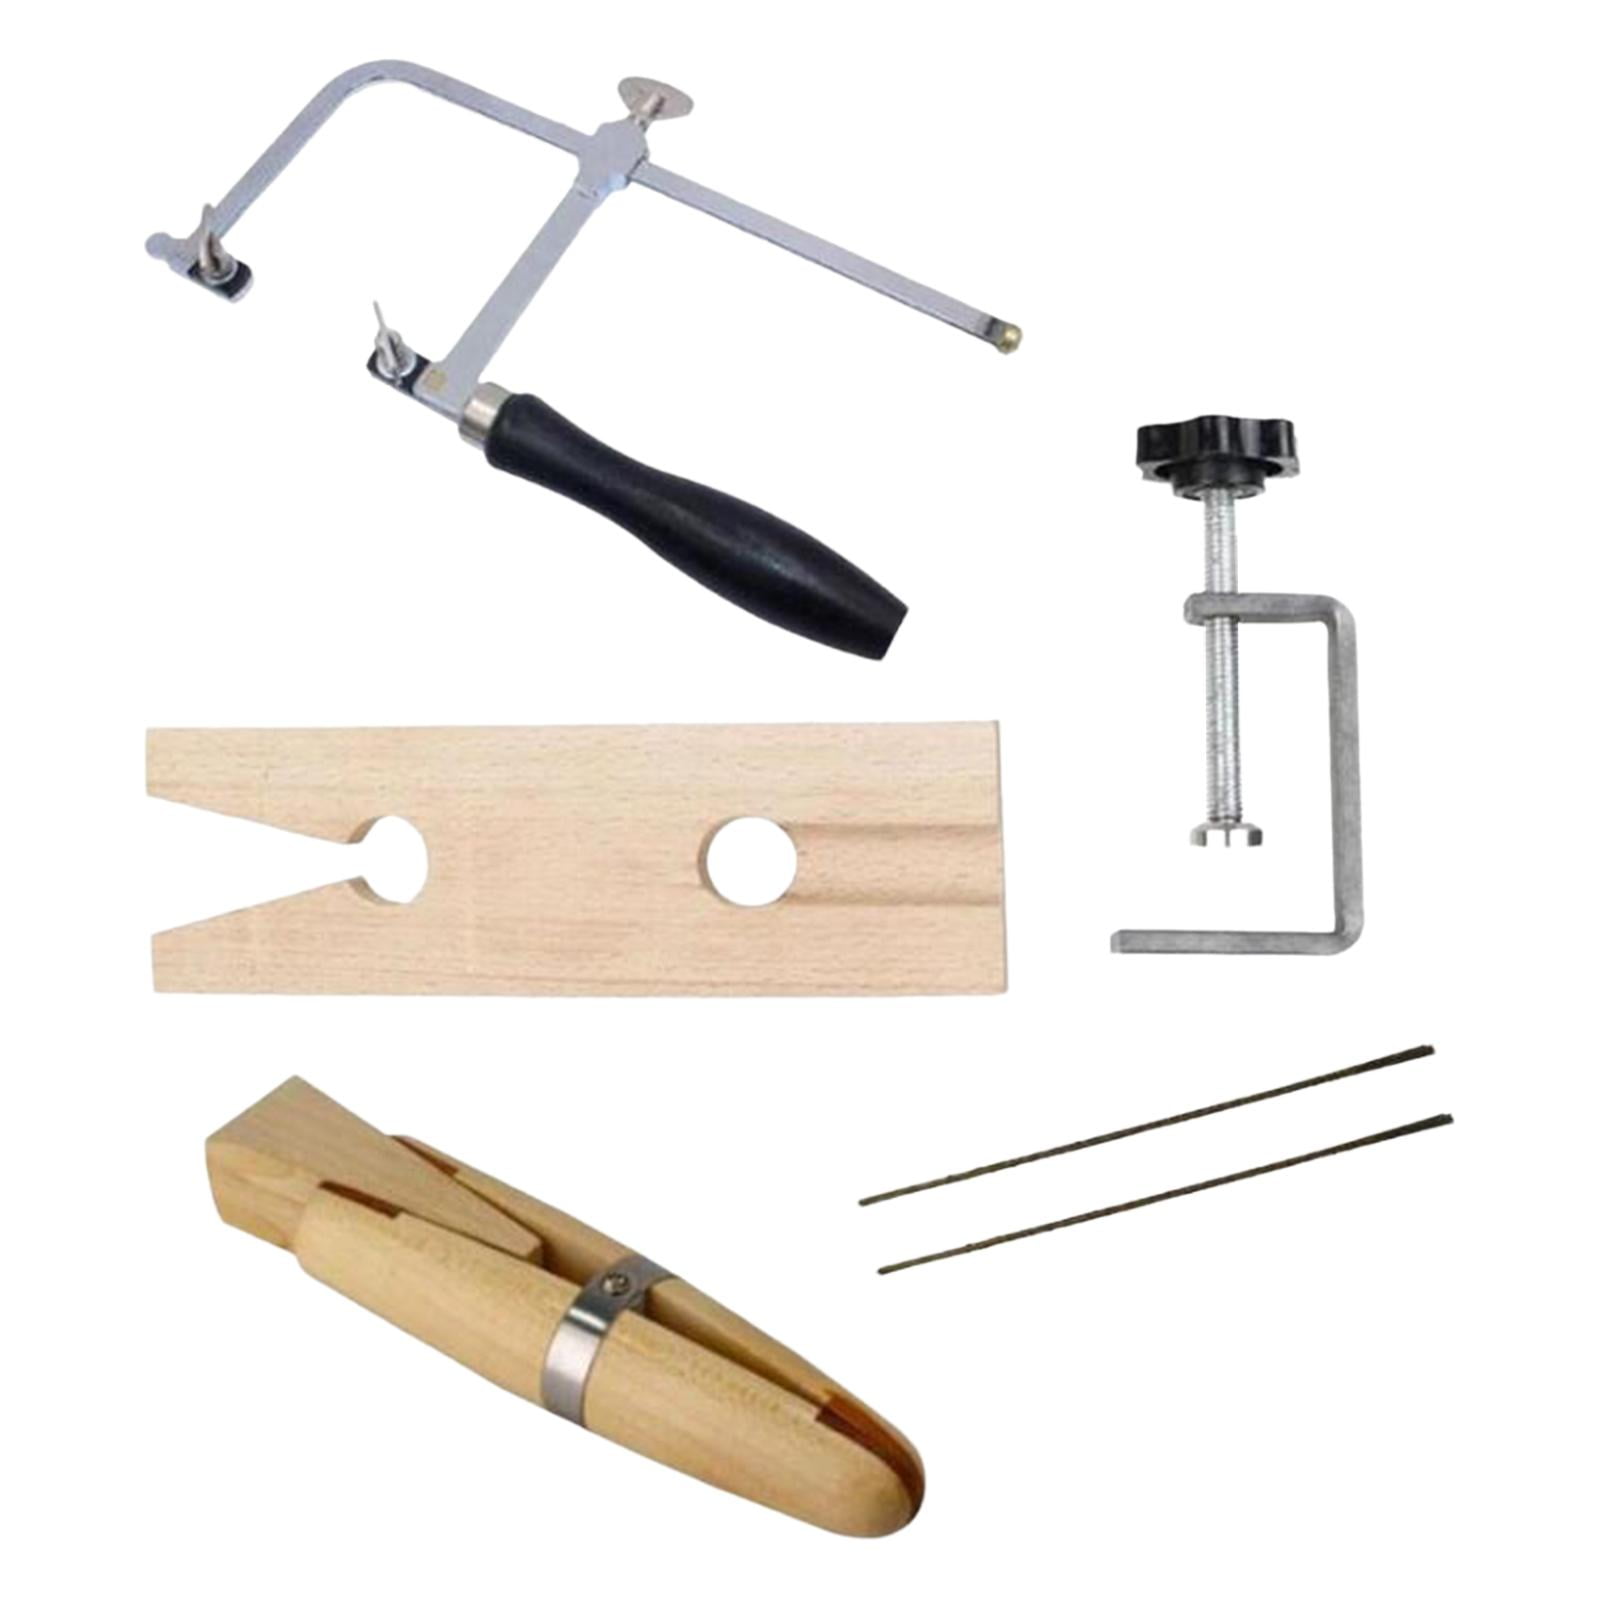 Professional Jewelry Making Tool Bench Pin Wooden Fixture Tools Set Clamp  for Drilling Processing Filing Polishing 